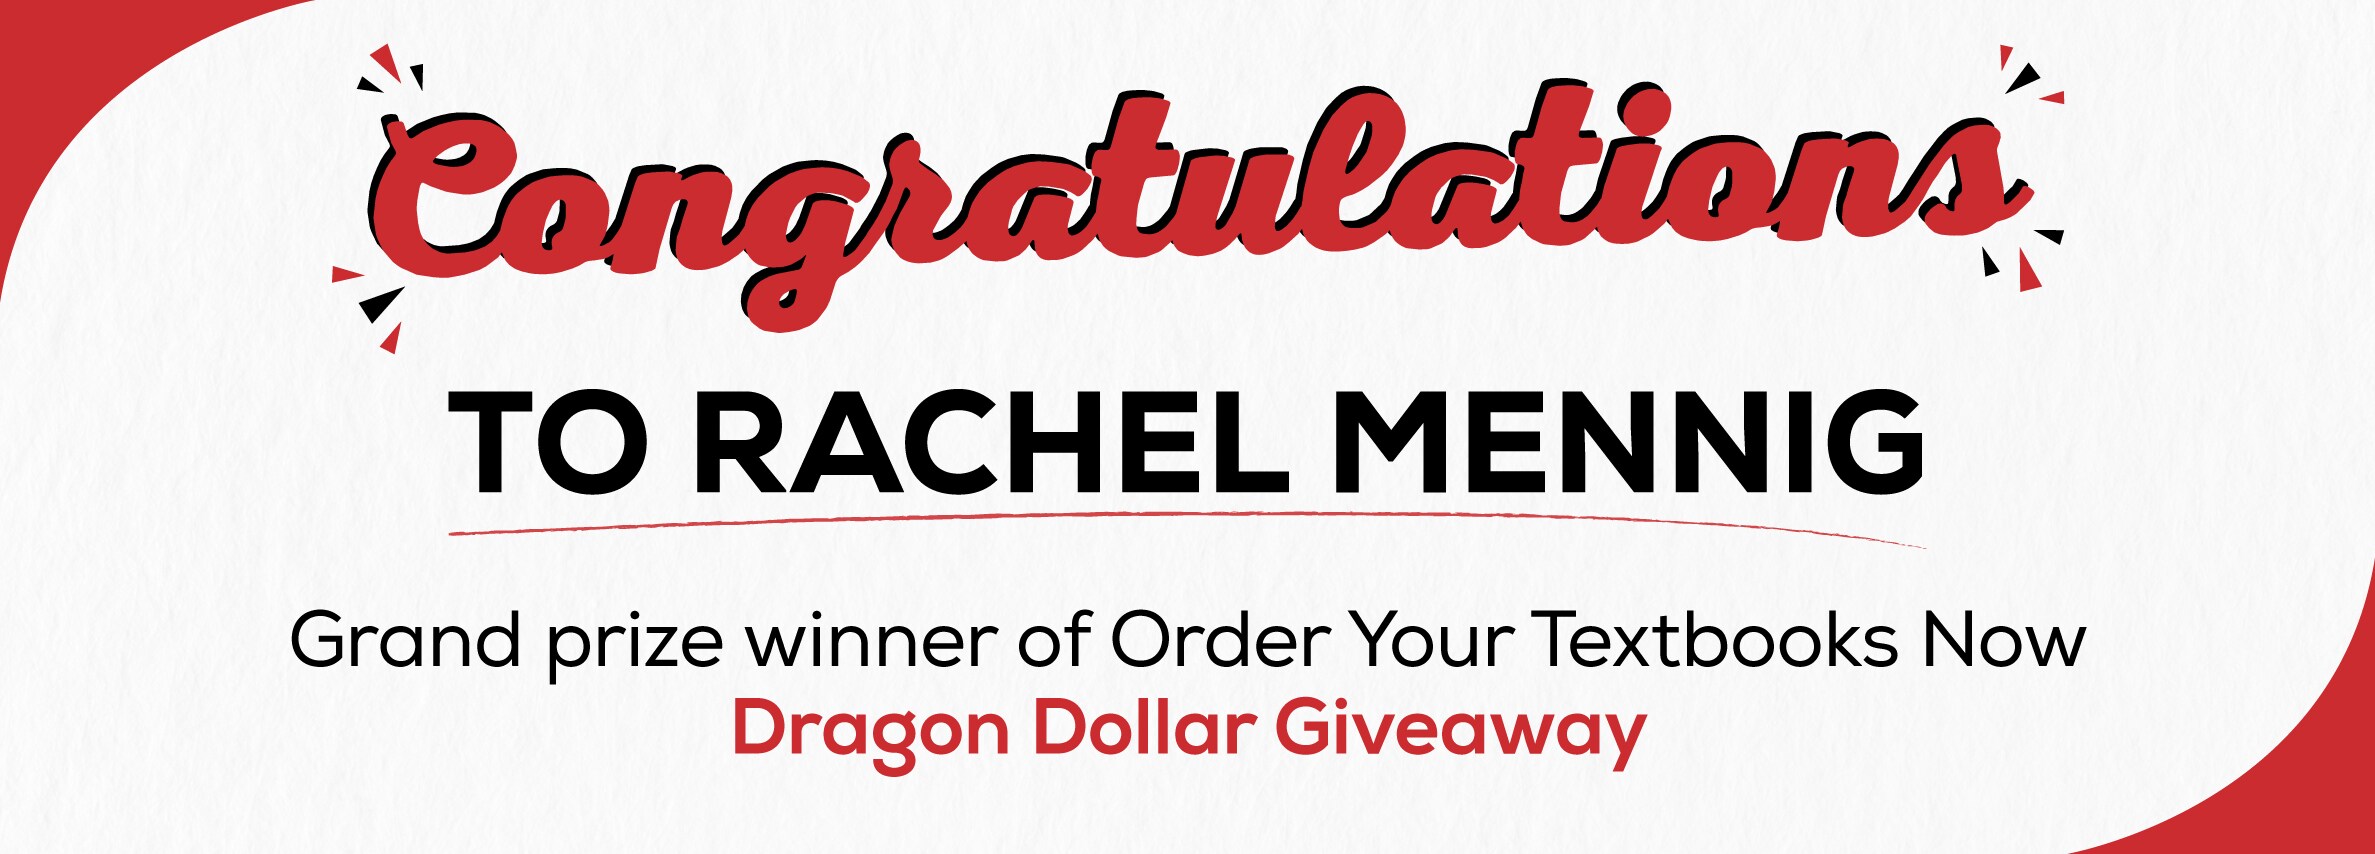 Congratulations to Rachel Mennig, the grand prize winner of Order Your Textbooks Now Dragon Dollar Giveaway